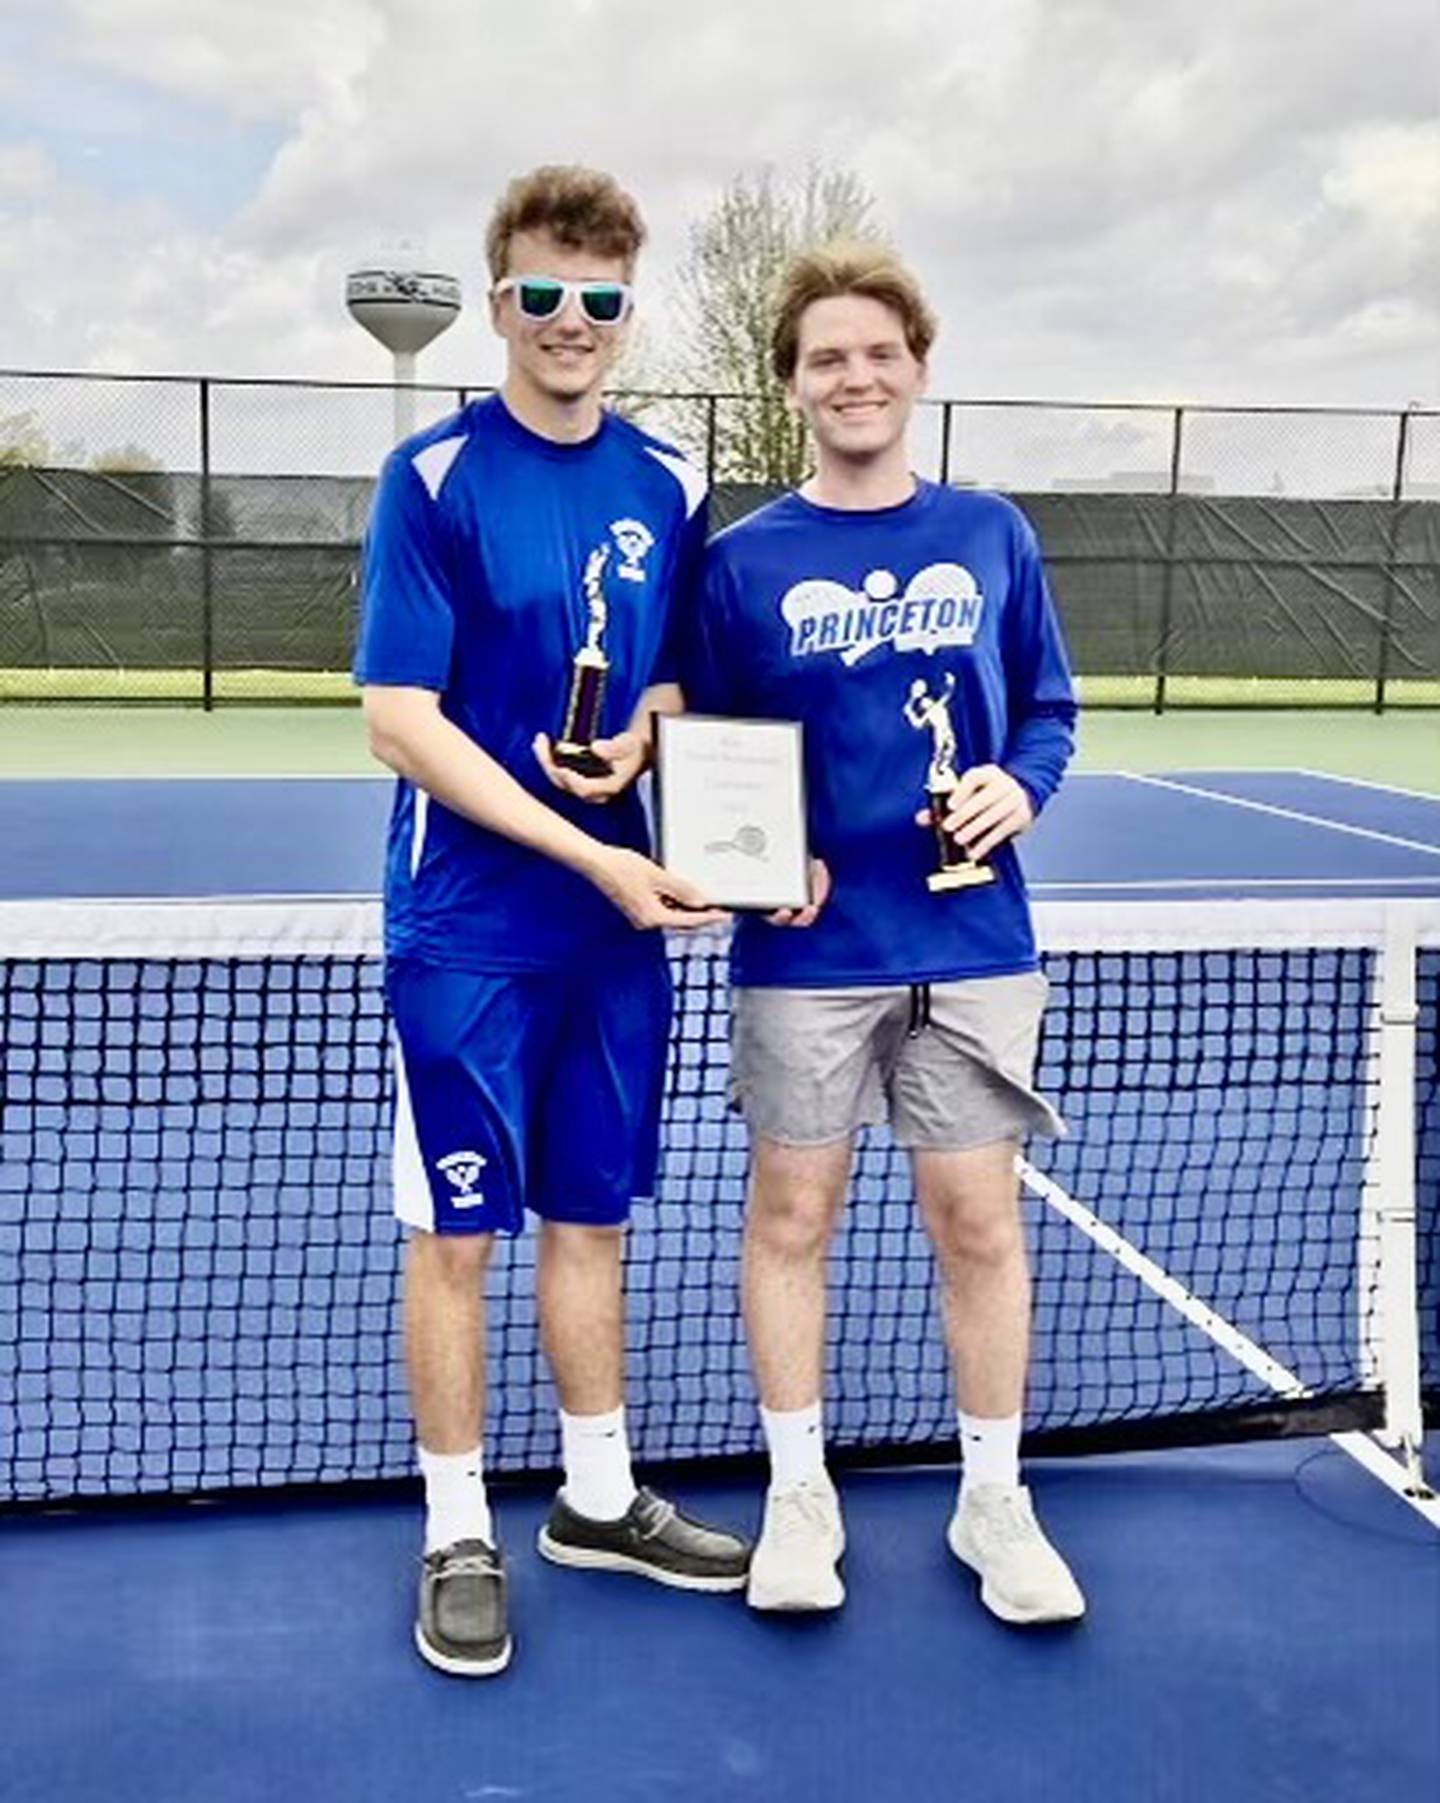 Seniors Ben Anderson (left) and Michael Ellis went 15-10 at No. 1 doubles for the Tigers this season.